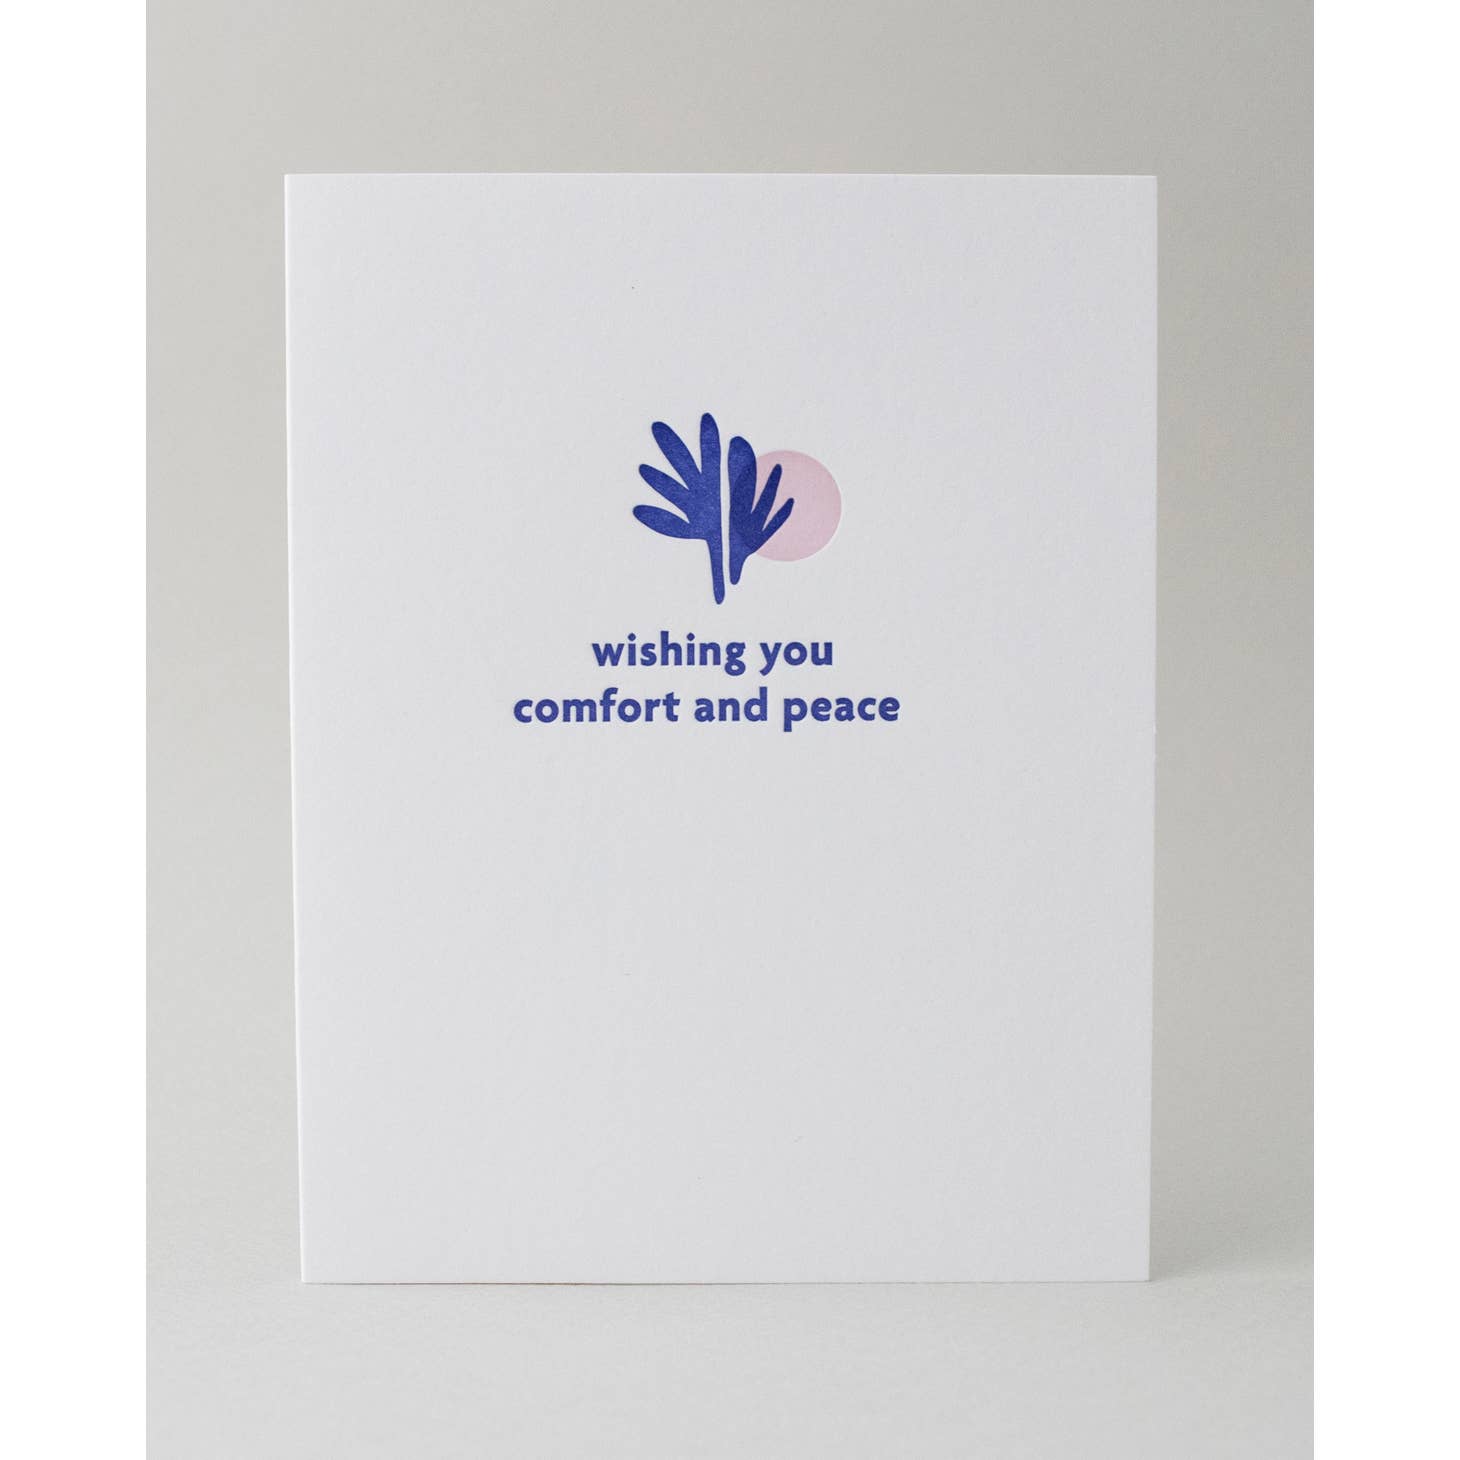 White background with image of blue leaves and pale pink circle with blue text says, "Wishing you comfort and peace". Envelope is included.